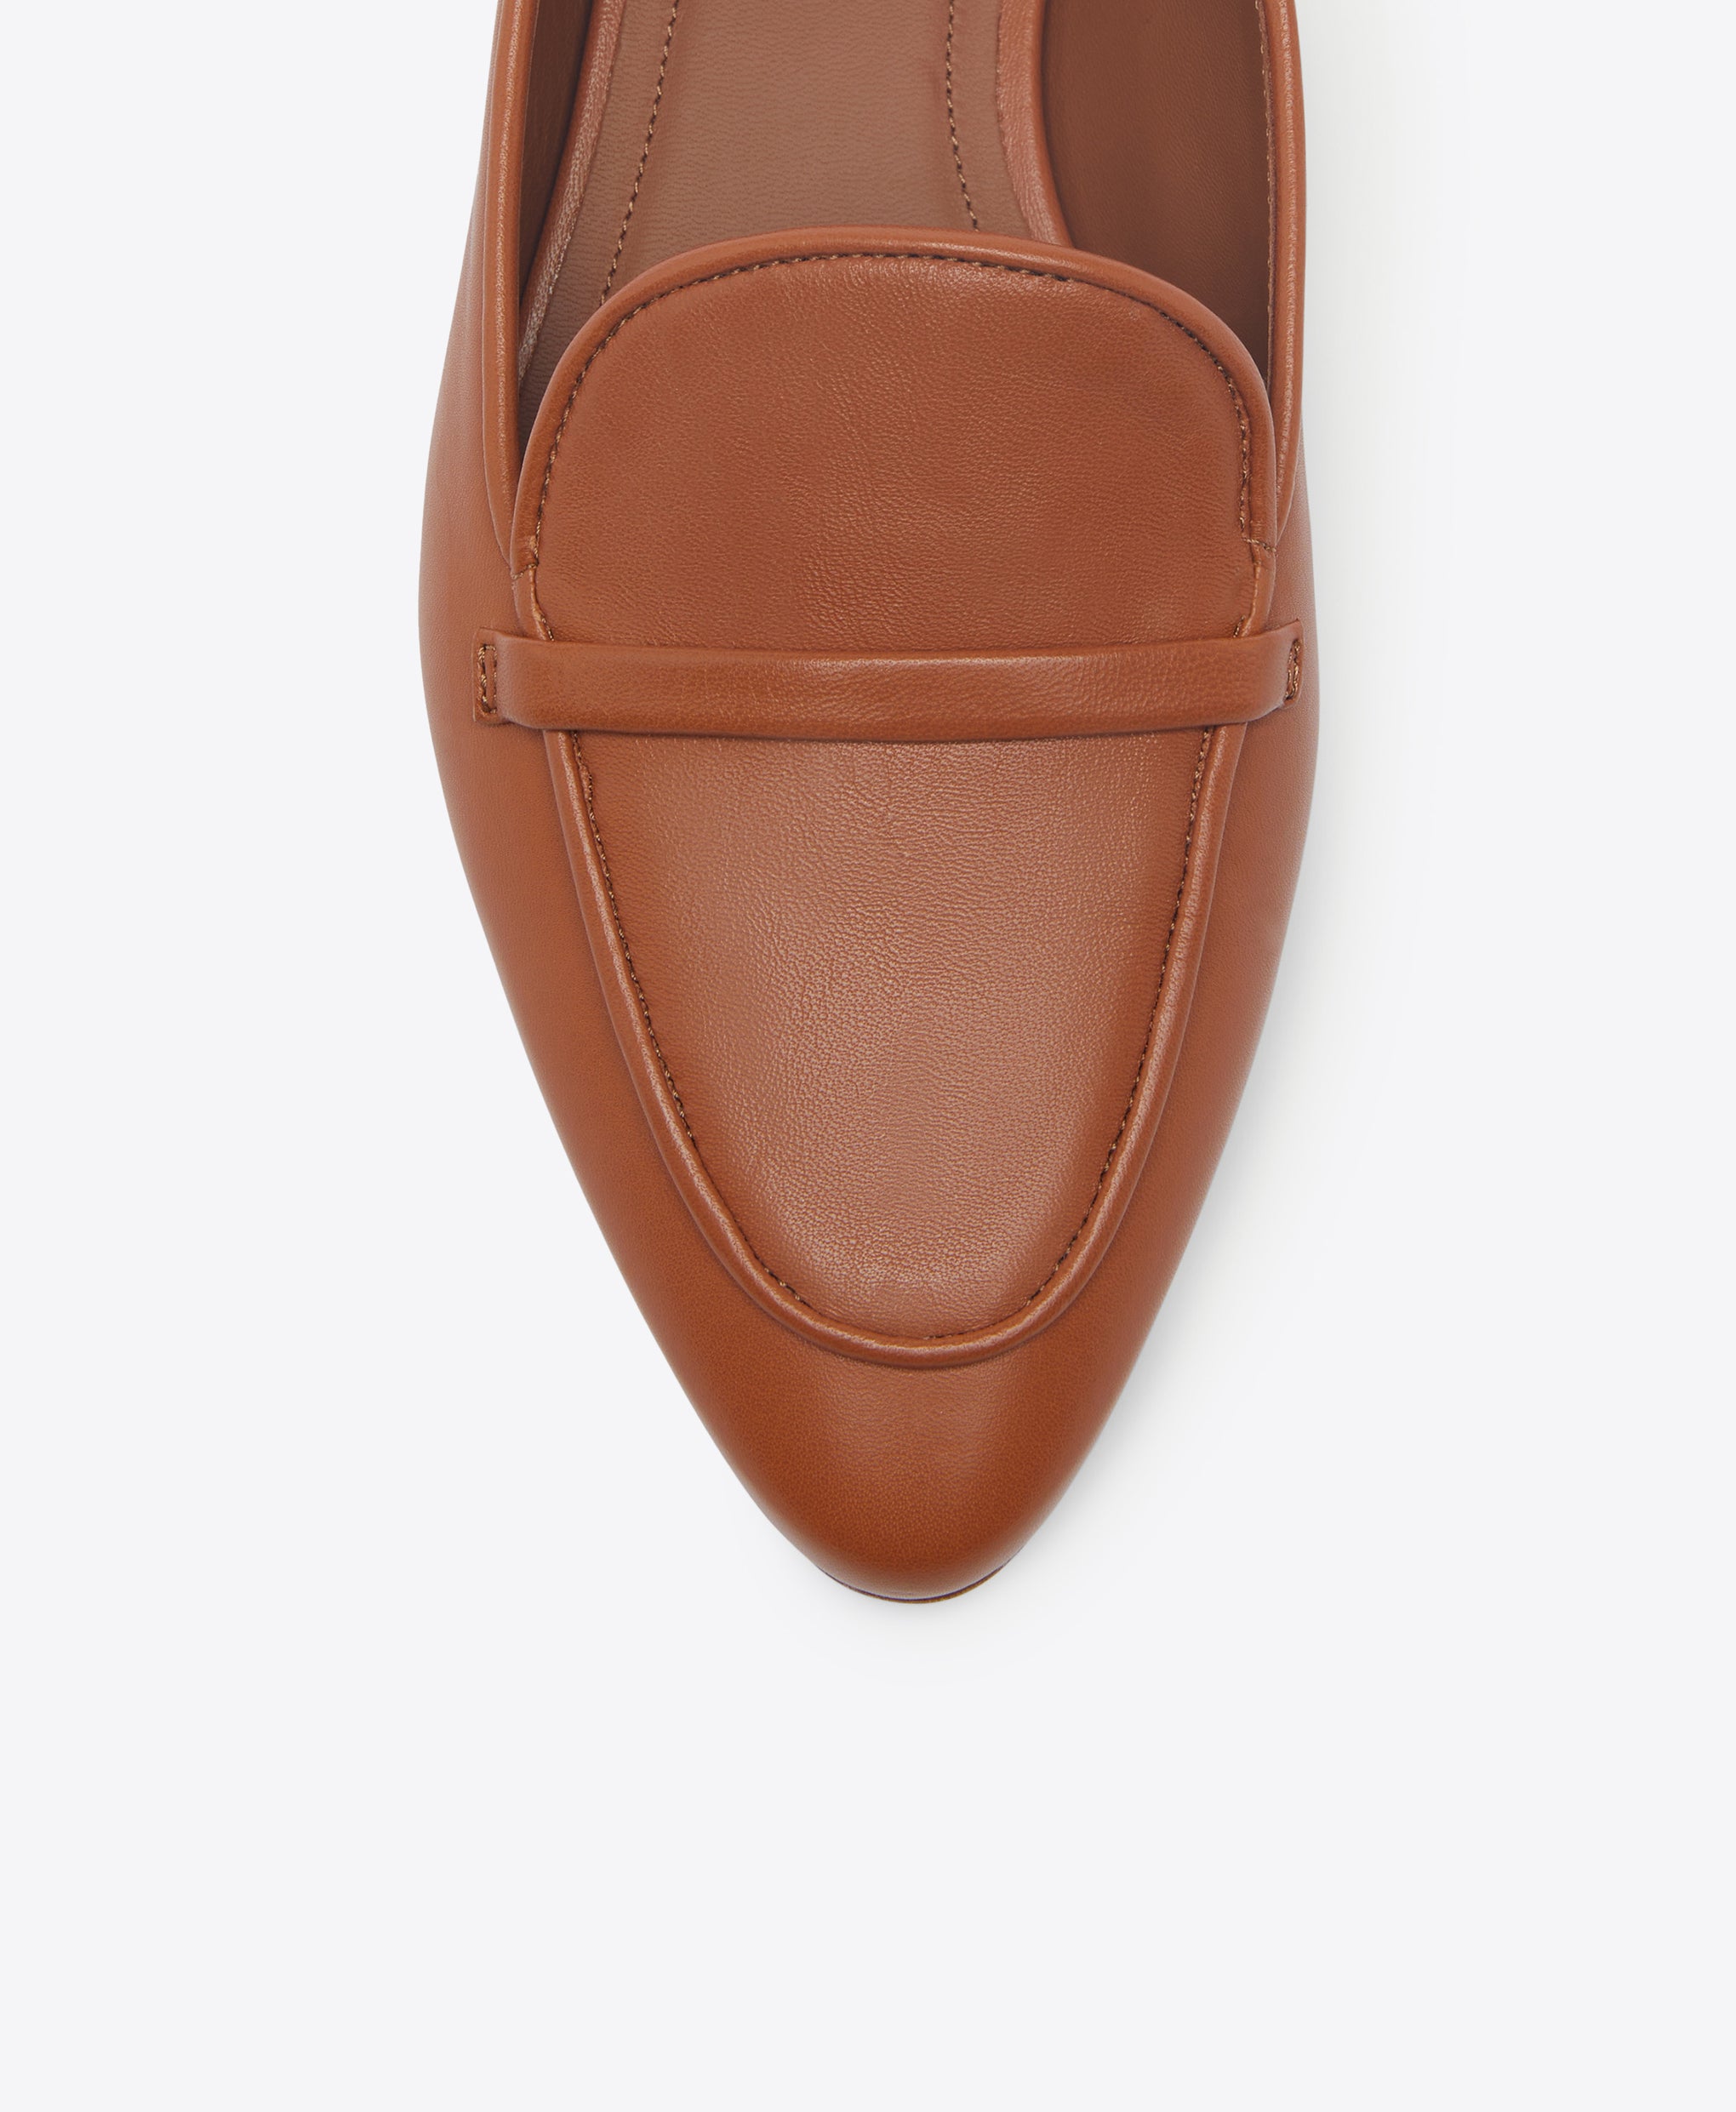 Malone Souliers Bruni Brown Leather Flat Loafers